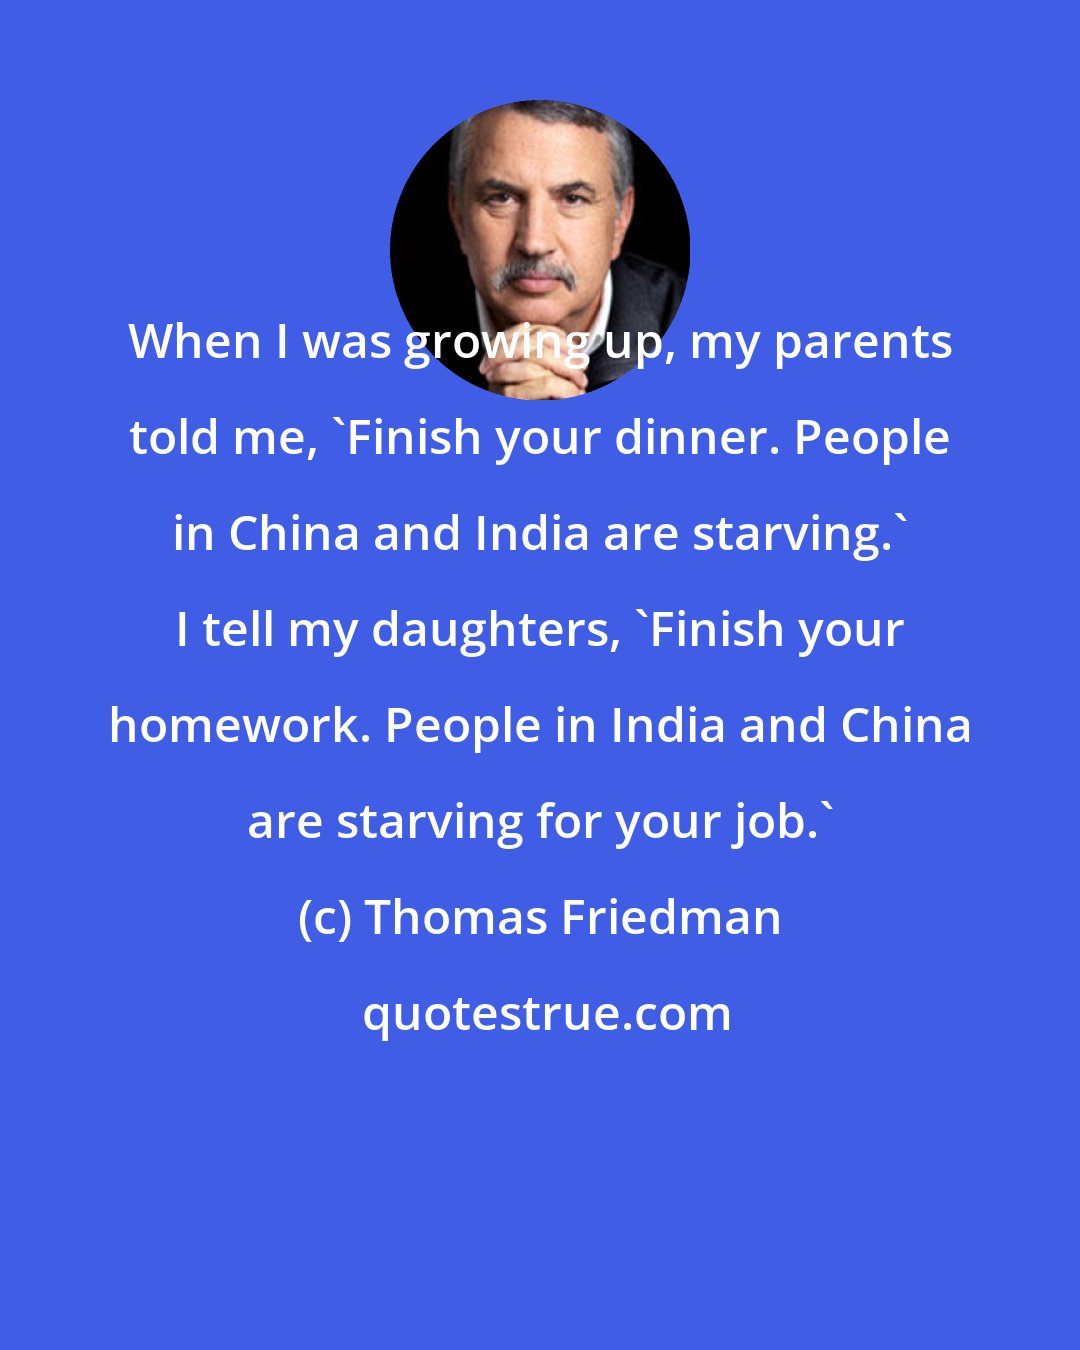 Thomas Friedman: When I was growing up, my parents told me, 'Finish your dinner. People in China and India are starving.' I tell my daughters, 'Finish your homework. People in India and China are starving for your job.'